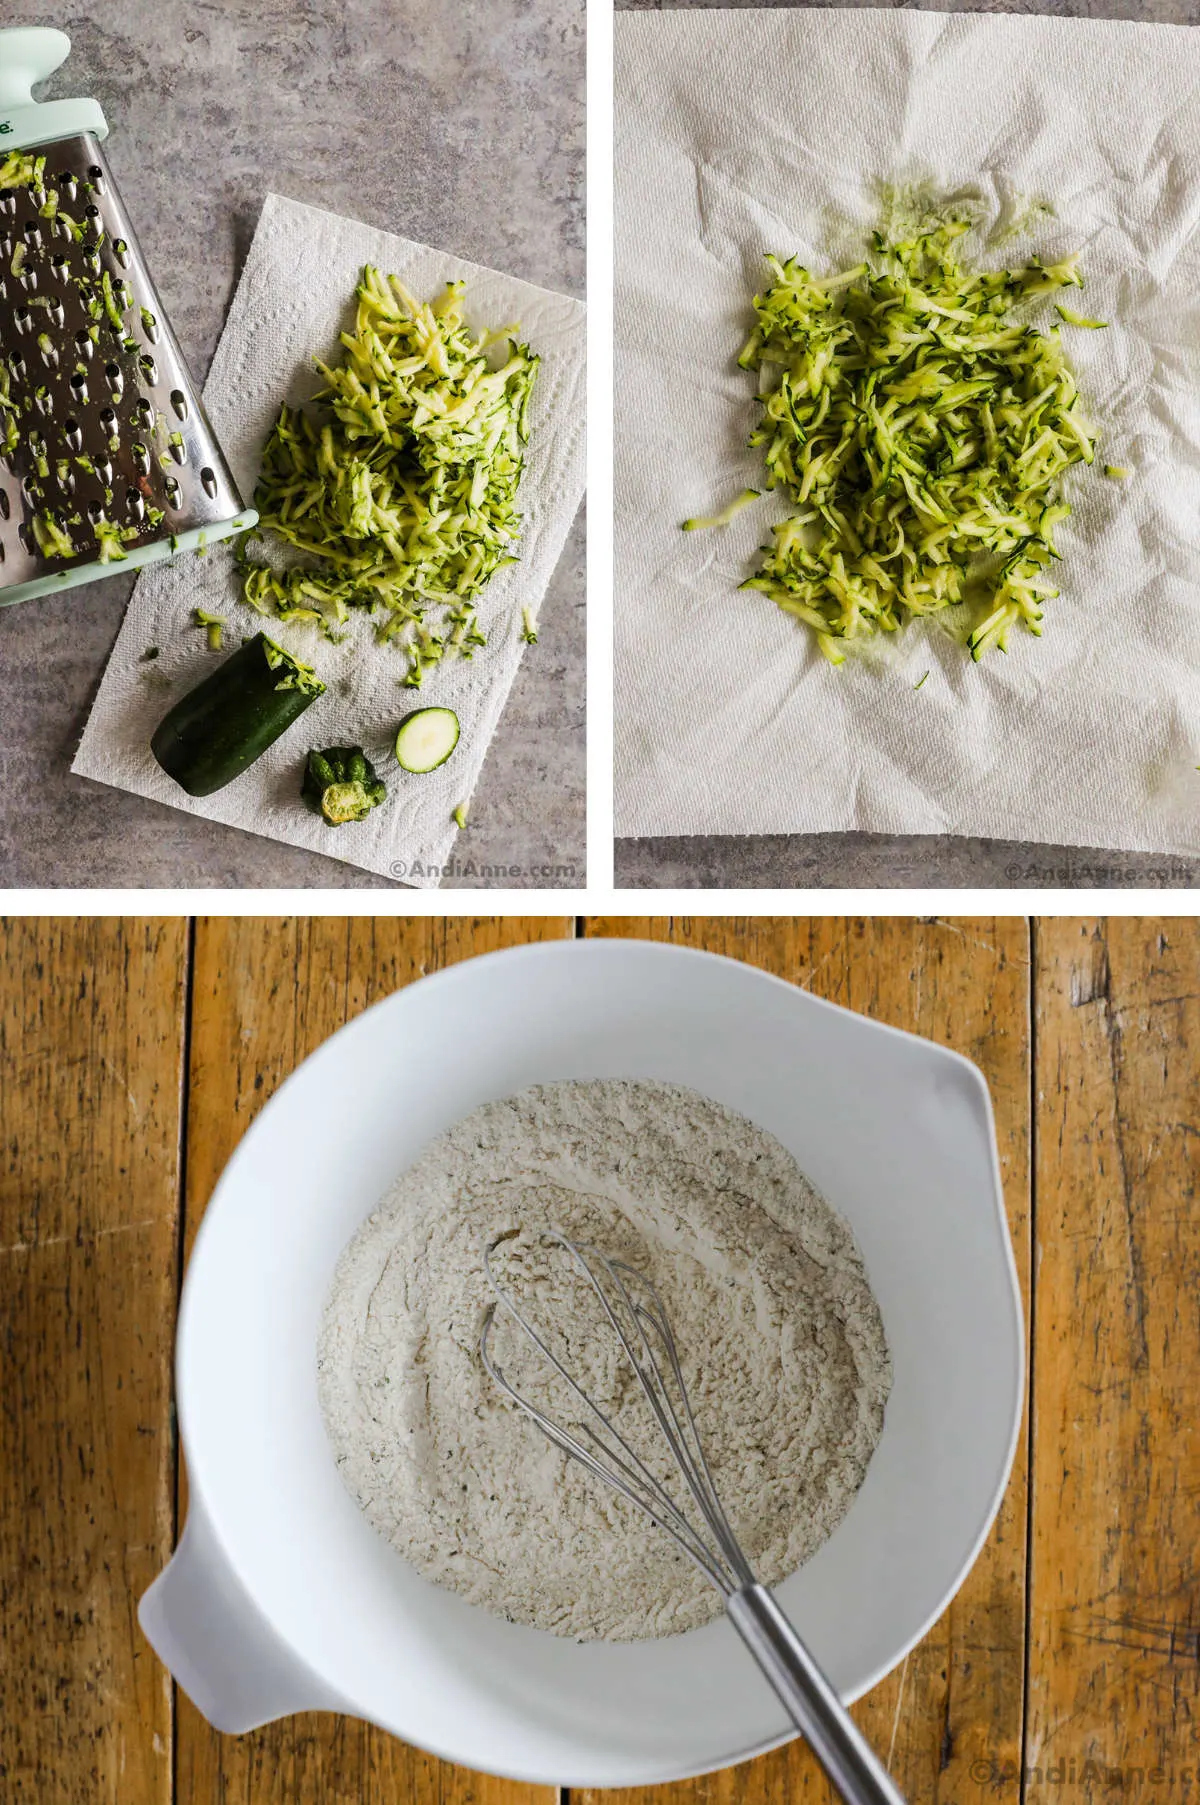 Three overhead images in one: 1. Half a zucchini on a paper towel beside a grater and pile of grated zucchini. 2. Grated zucchini drying on paper towel. 3. White bowl with dry ingredients and a whisk.